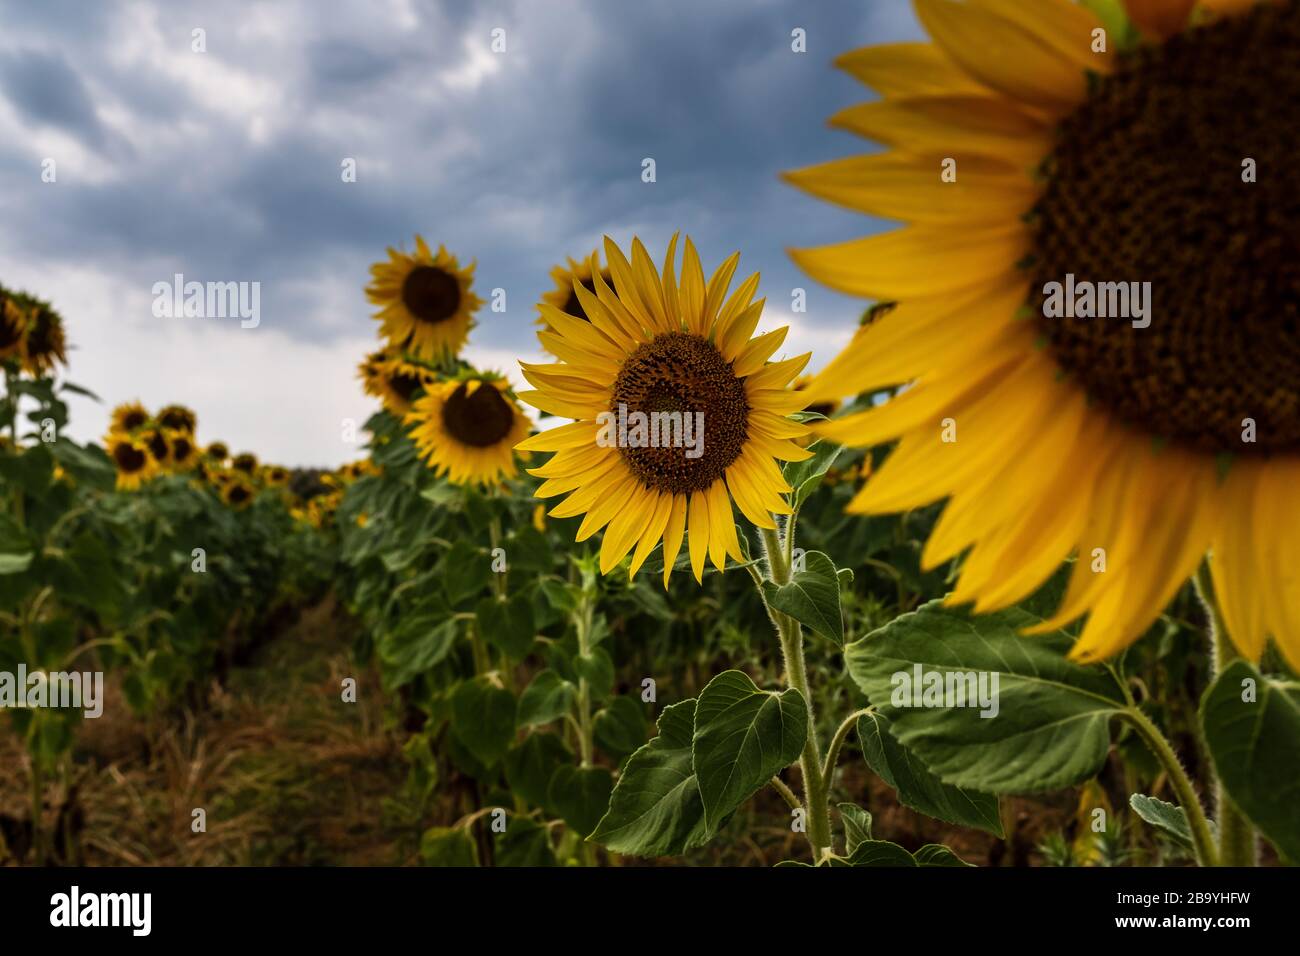 Selective focus on blossom sunflowers in cultivated fields with overcast sky background. Stock Photo